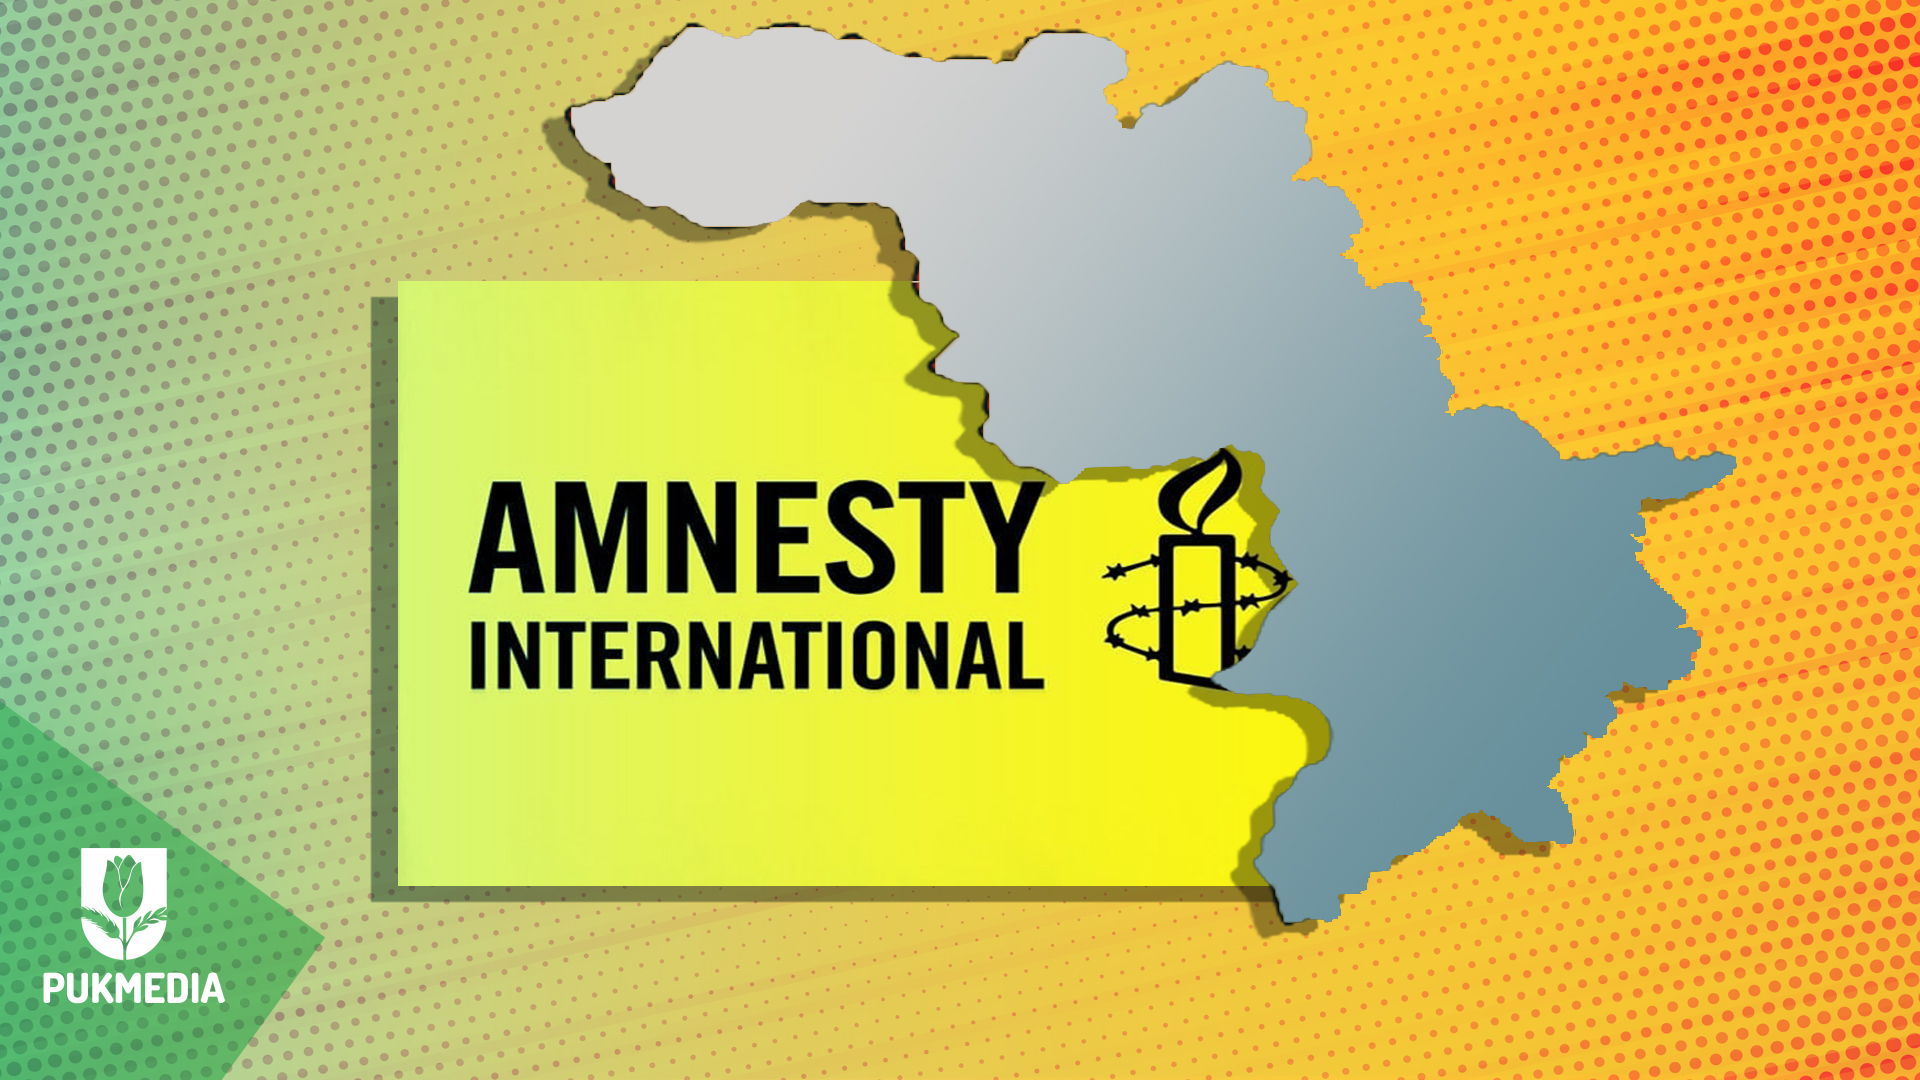  Amnesty International released its annual report for 2022 